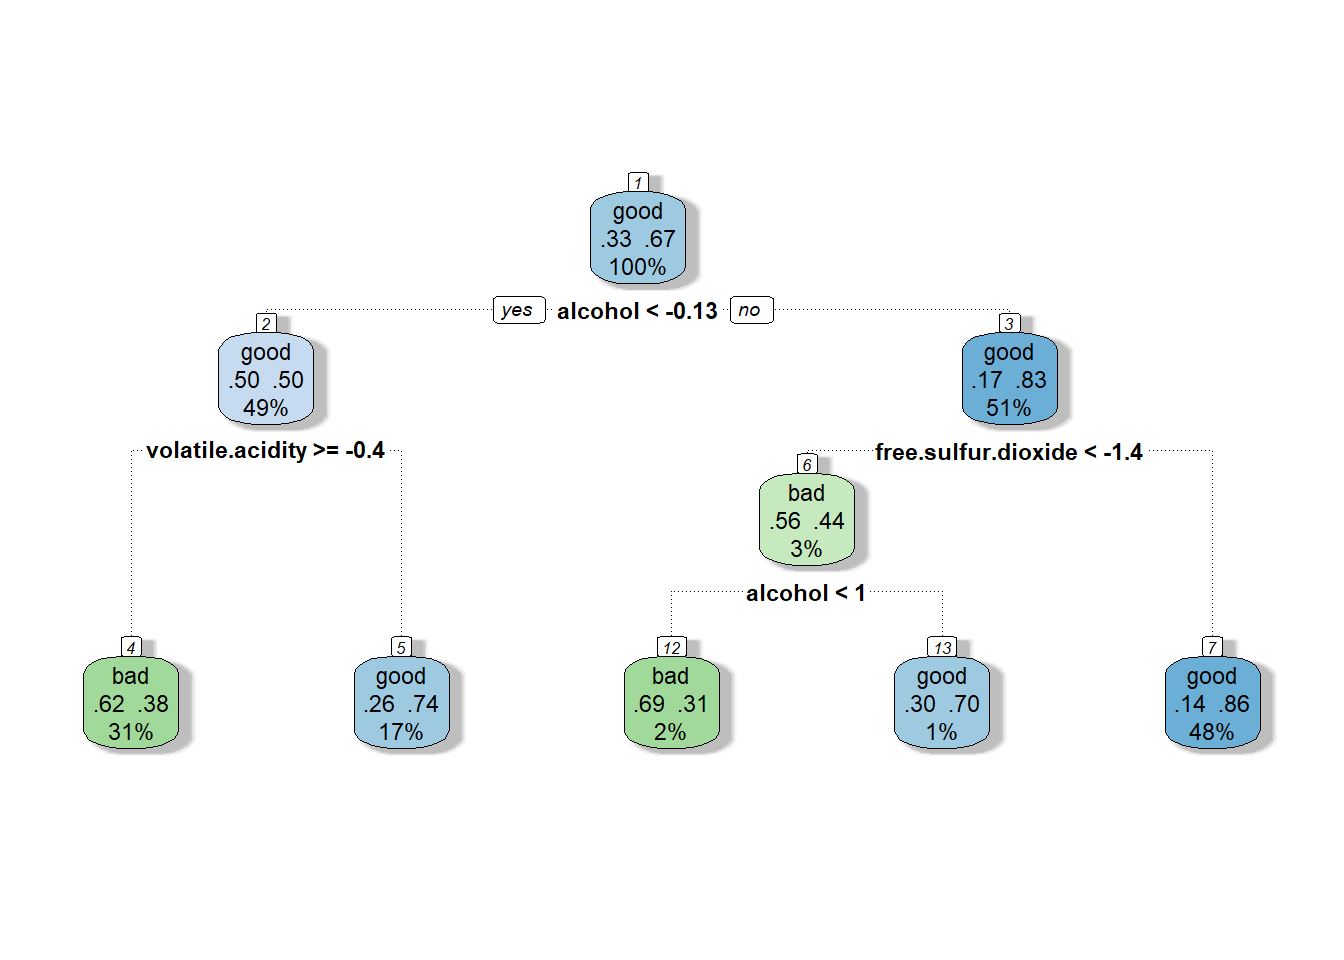 Decision tree built using rpart and 10-fold repeated cross-validation 3 times.